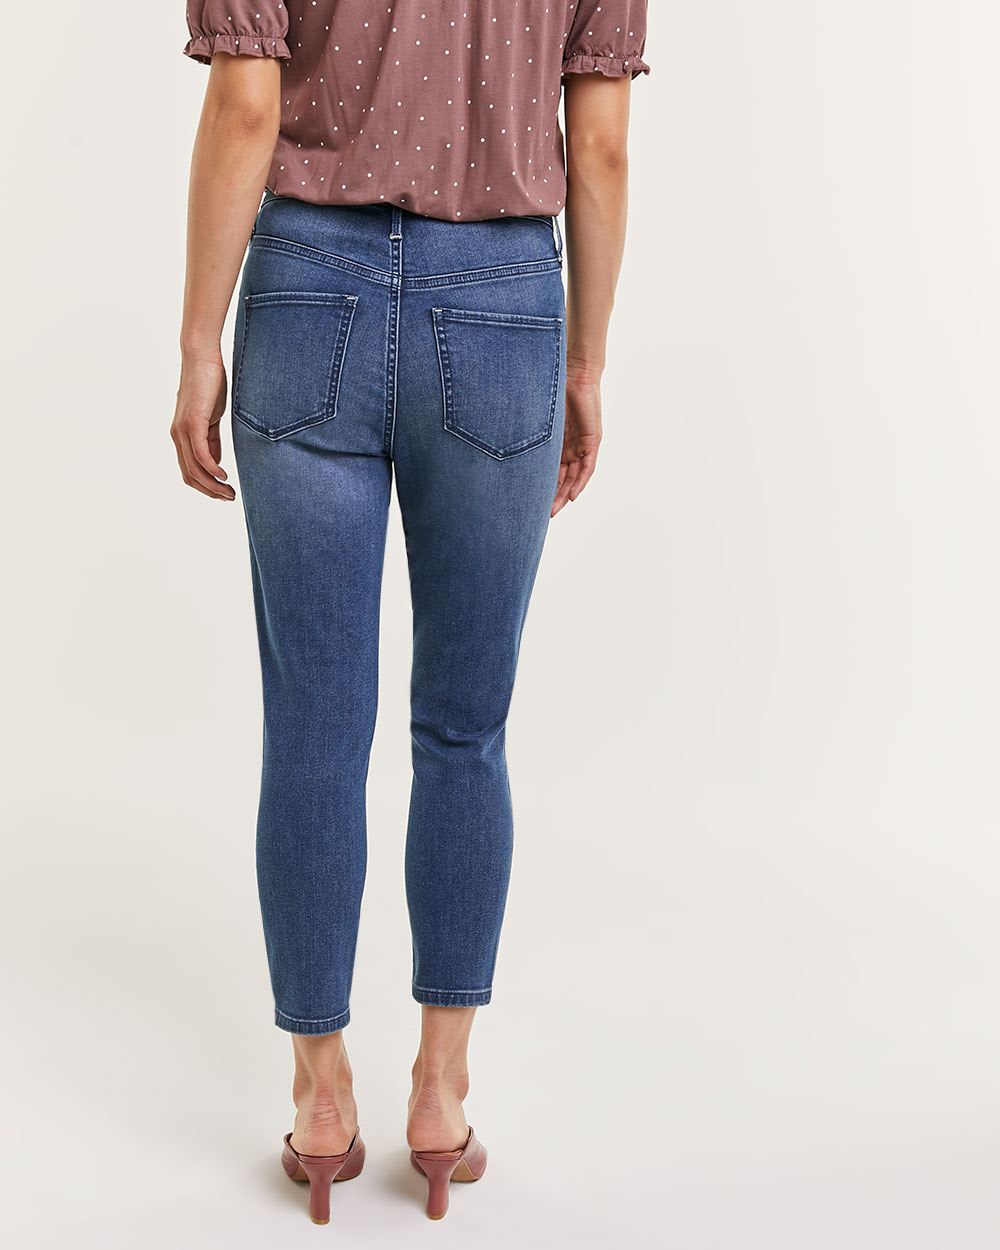 Super High Rise Cropped Skinny Jeans The Curvy - Petite